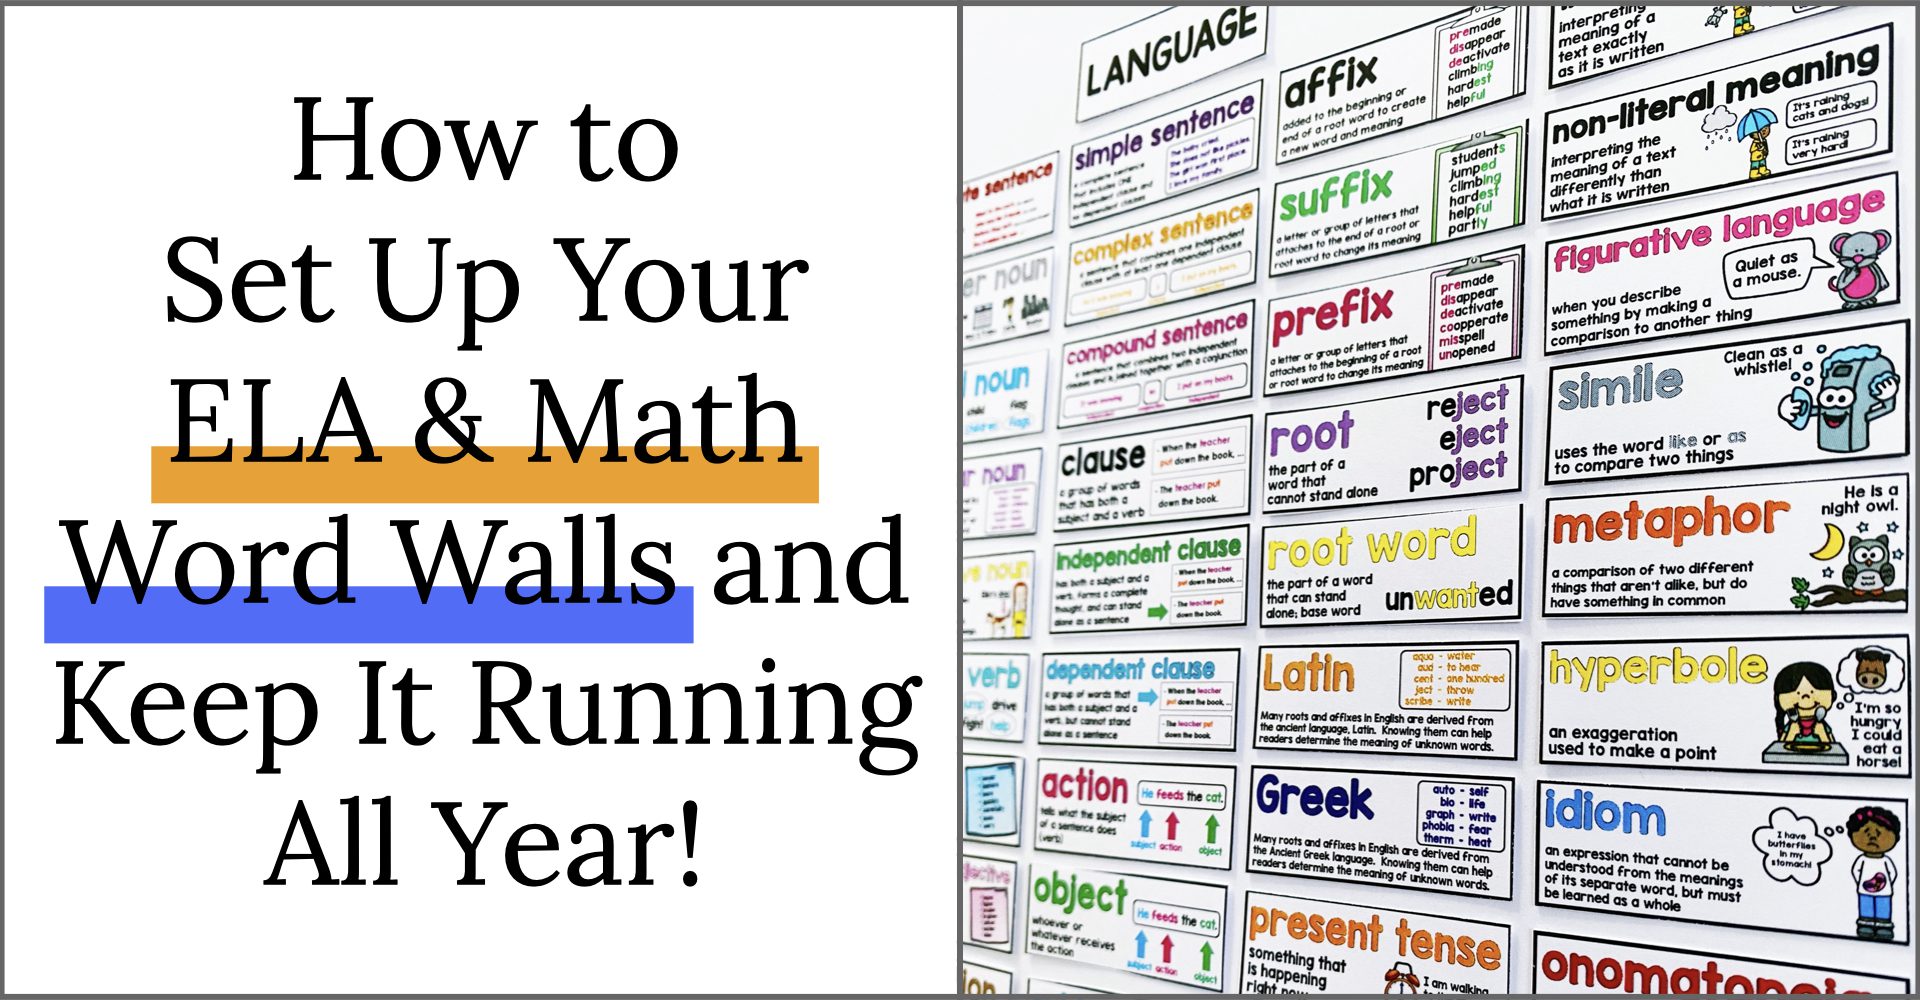 4 Reasons to Ditch Your Word Wall  Classroom word wall, Word wall ideas  elementary, Math word walls